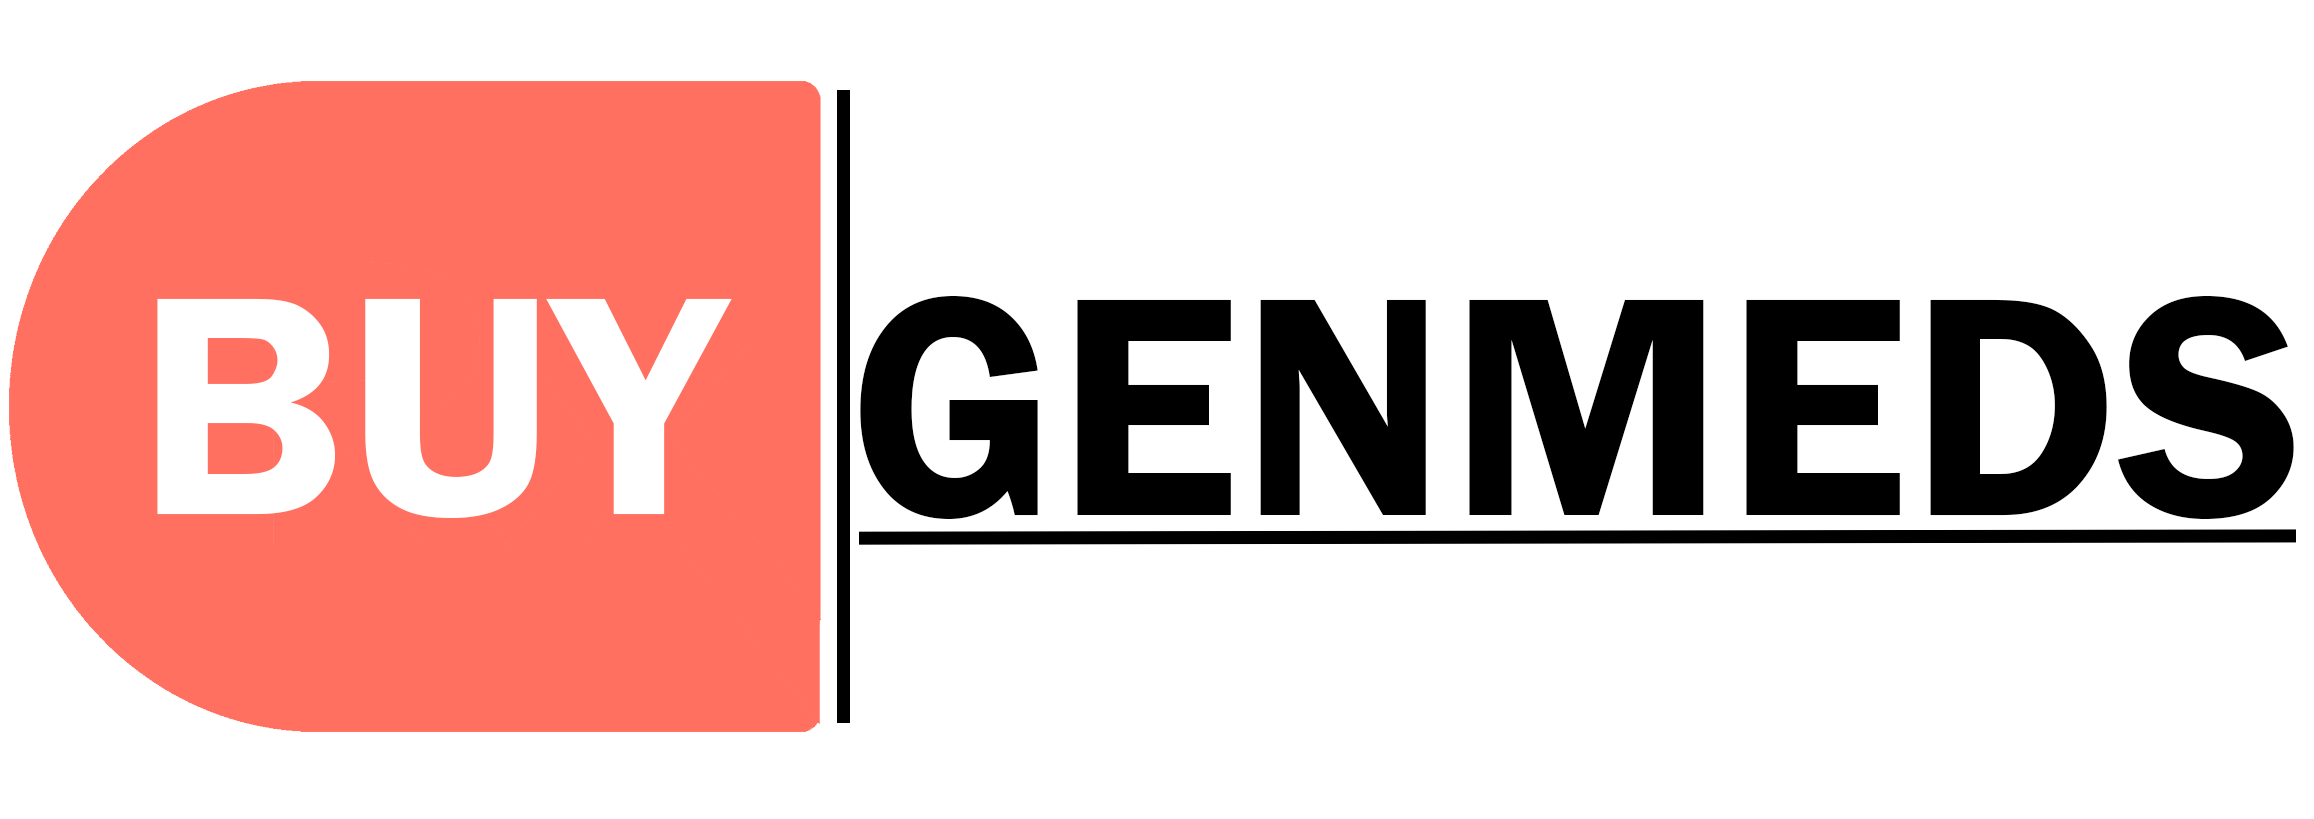 Company logo of Buygenmeds